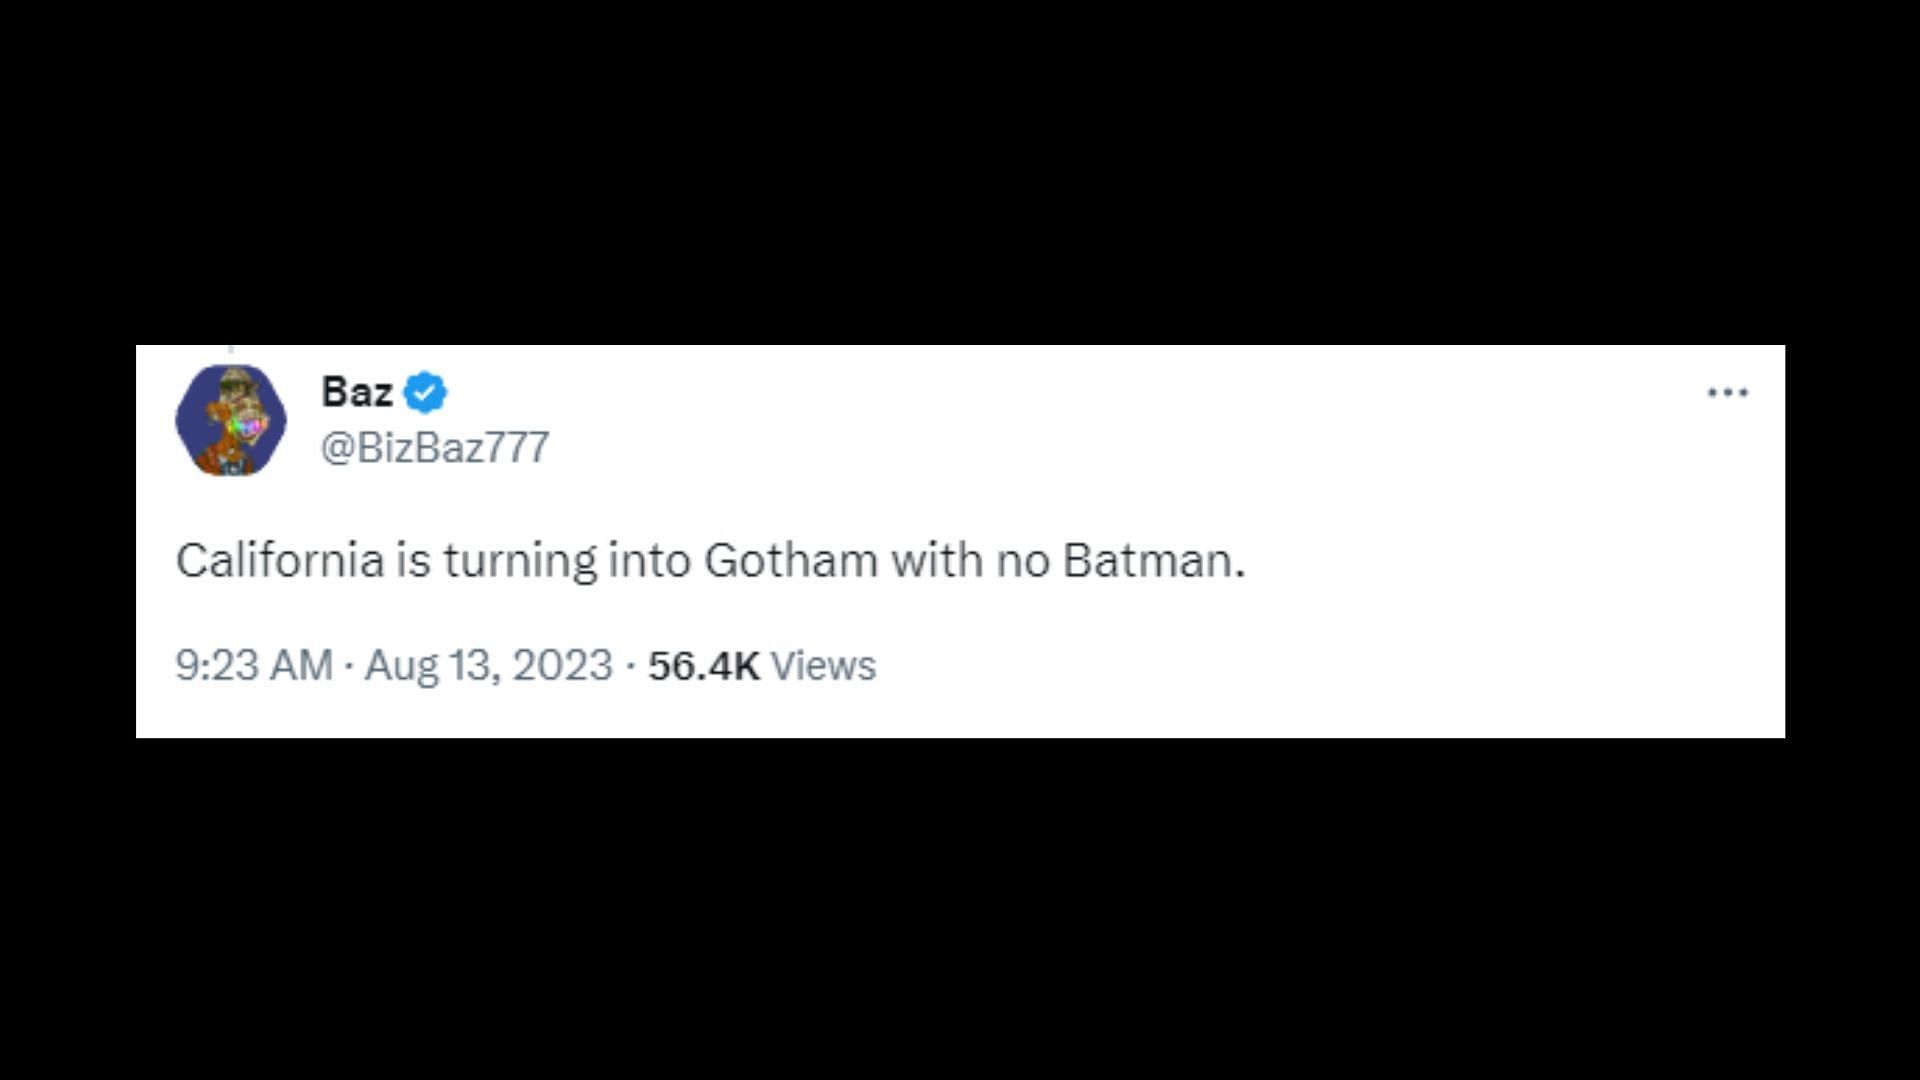 Gotham with no Batman: Topanga Mall Nordstrom looting video goes viral,  sparks outrage online